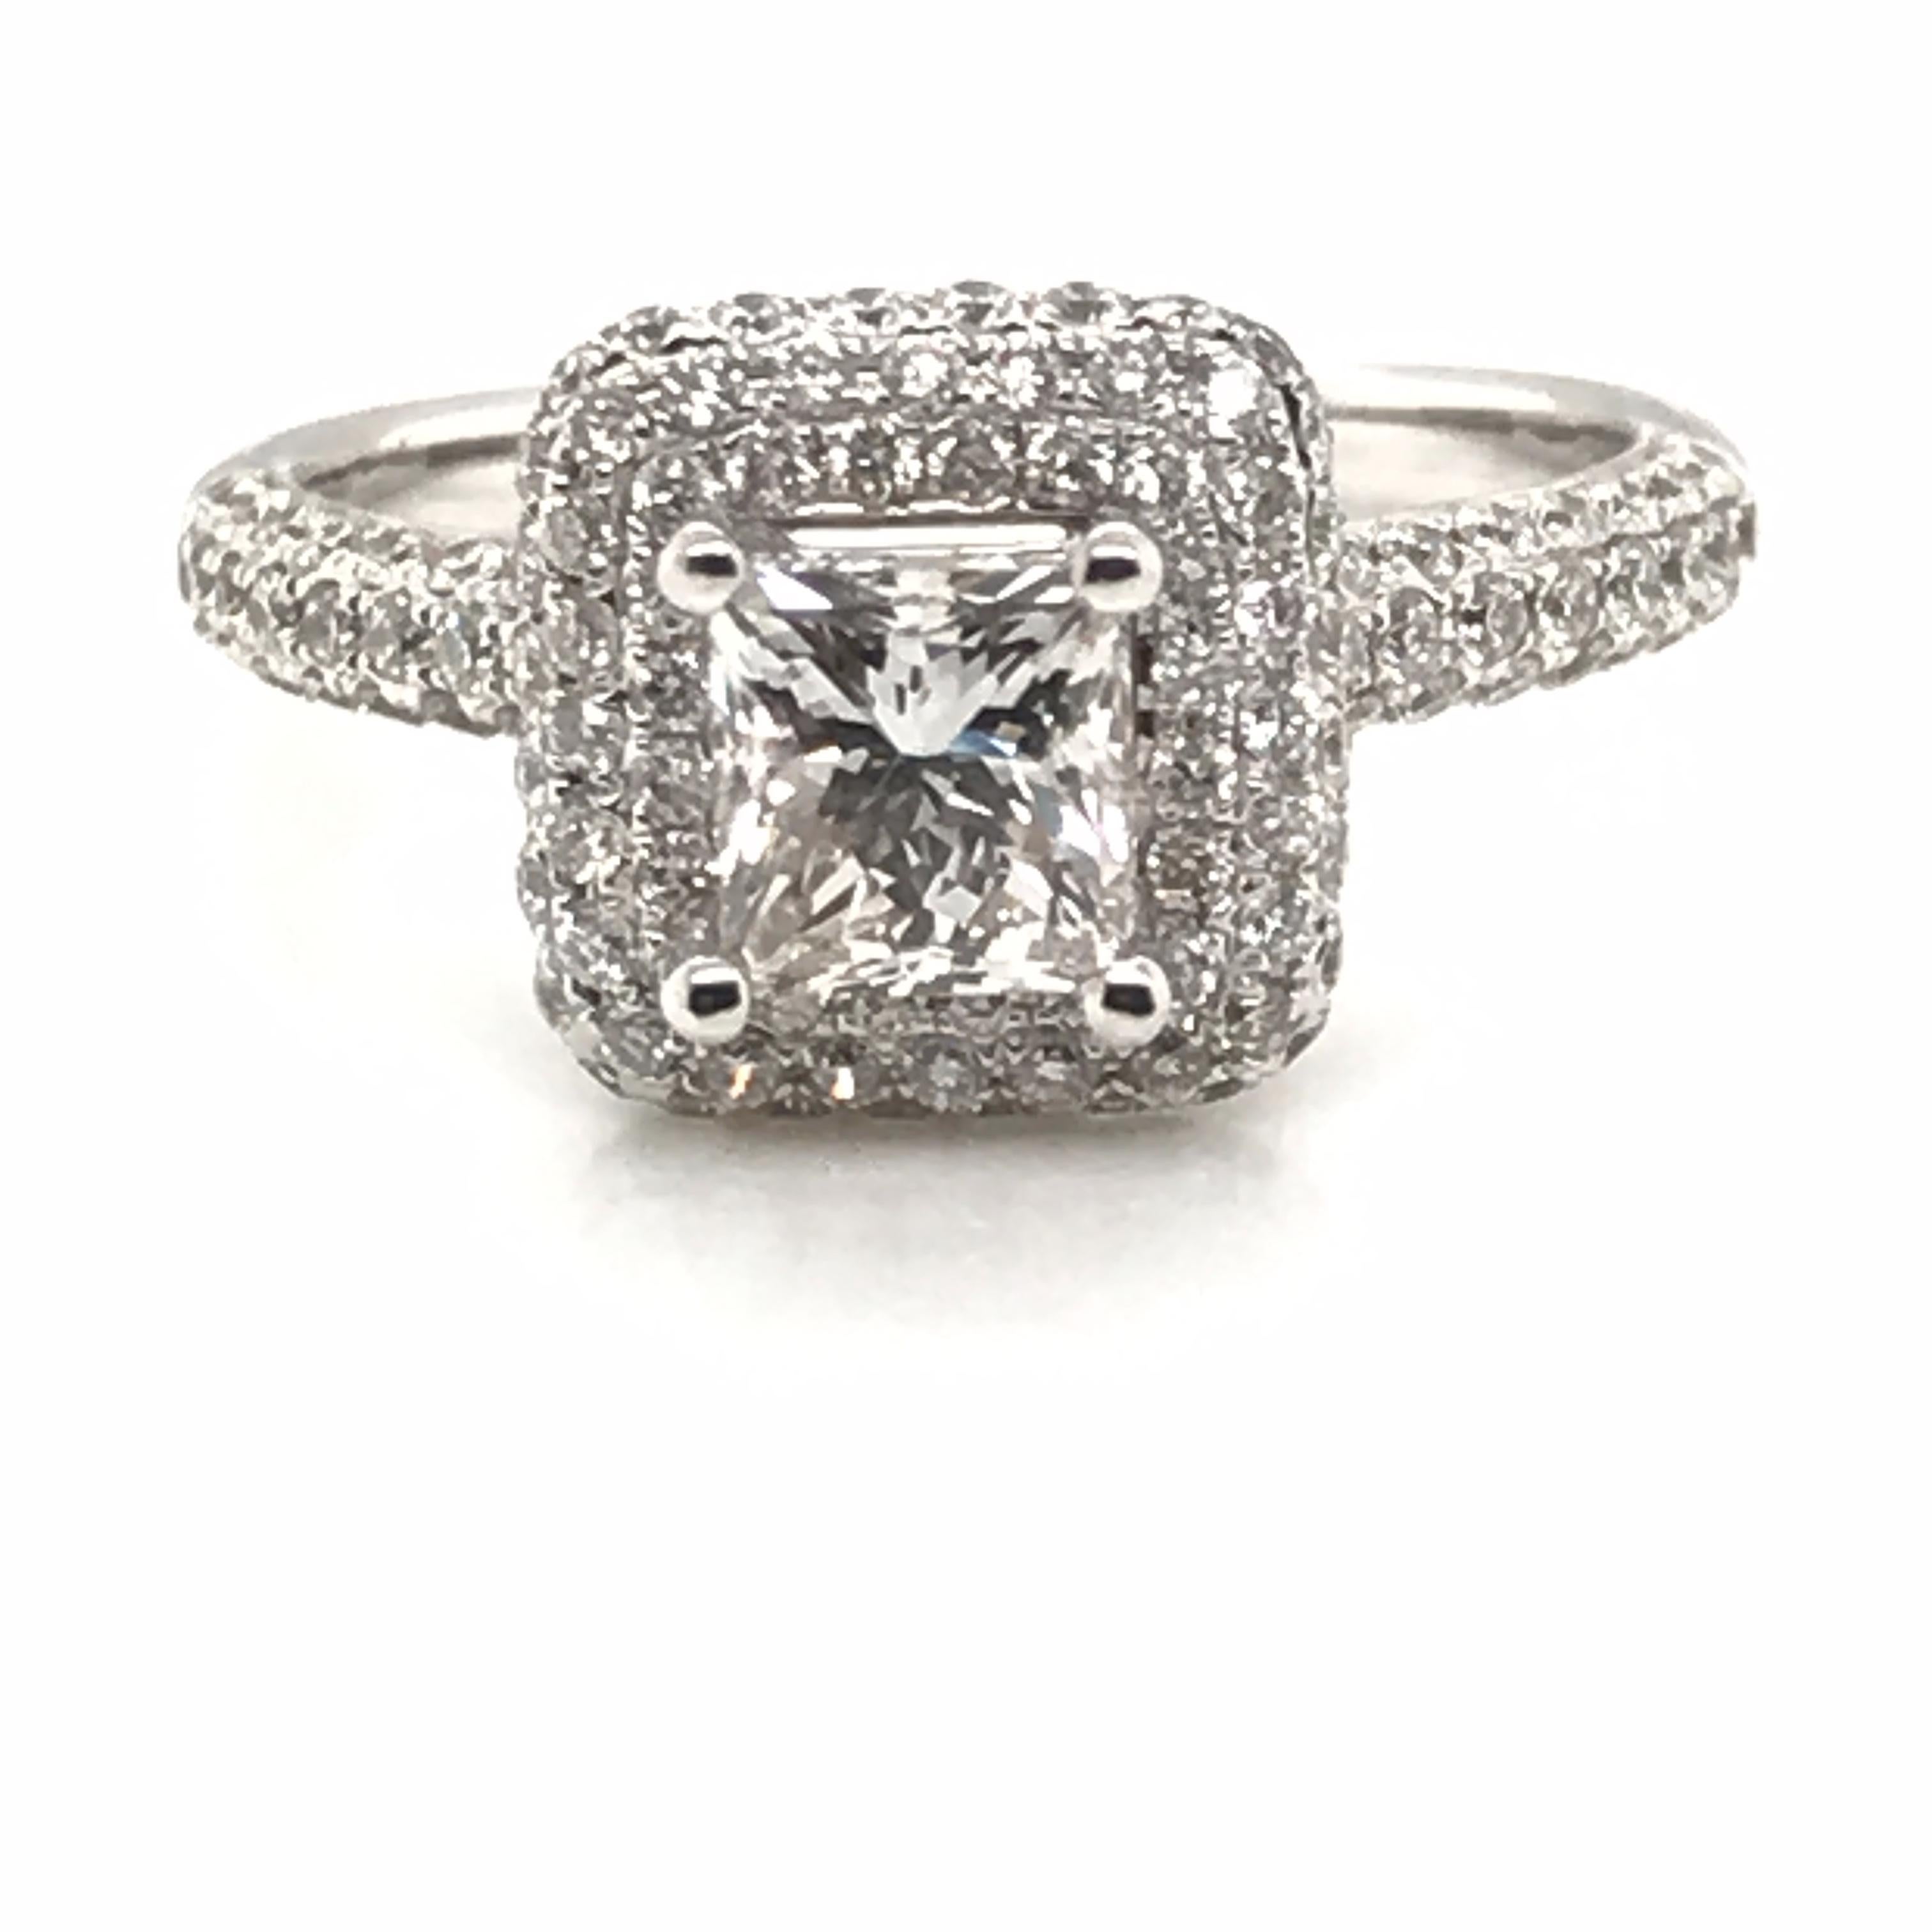 HJN Inc. Ring featuring a 1.96 Carat Princess Cut Center With Rounds Diamond Ring

Center Stone Diamond Weight: 1.01 Carats
Round-Cut Diamond Weight: 0.95 Carats

Total Stones: 159
Stone Quality: SI1
Color Grade: H
Total Diamond Weight: 1.96
Polish